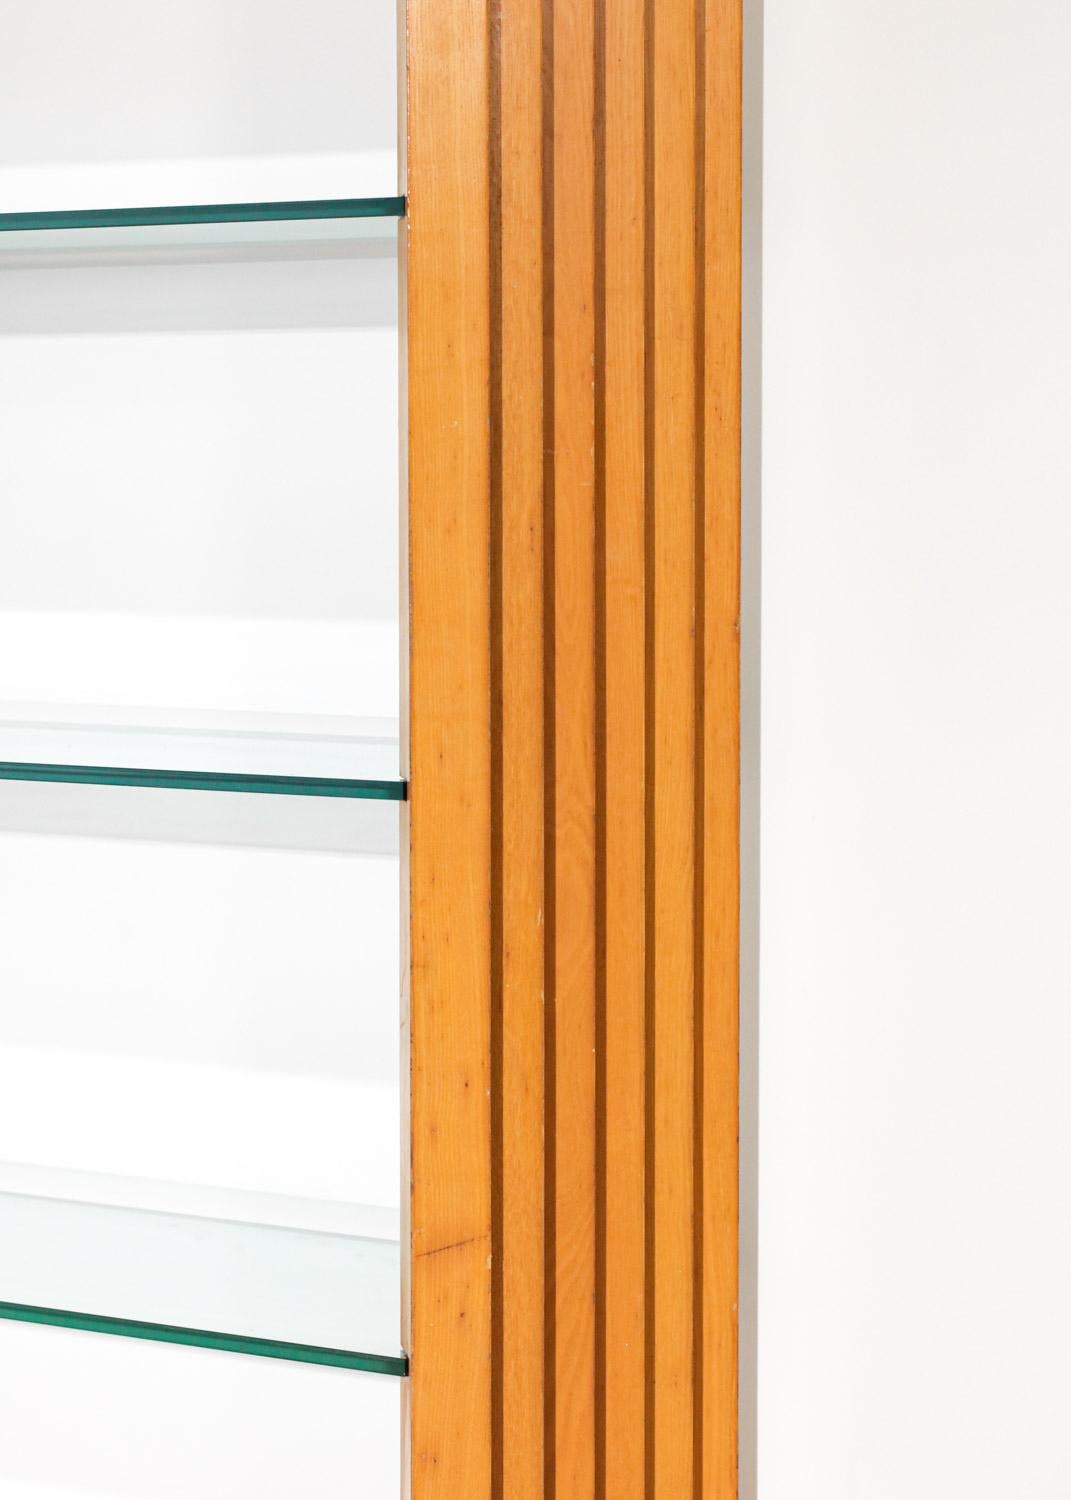 Italian Bookcase 60's / 70's Glass and Solid Wood, G343 For Sale 11